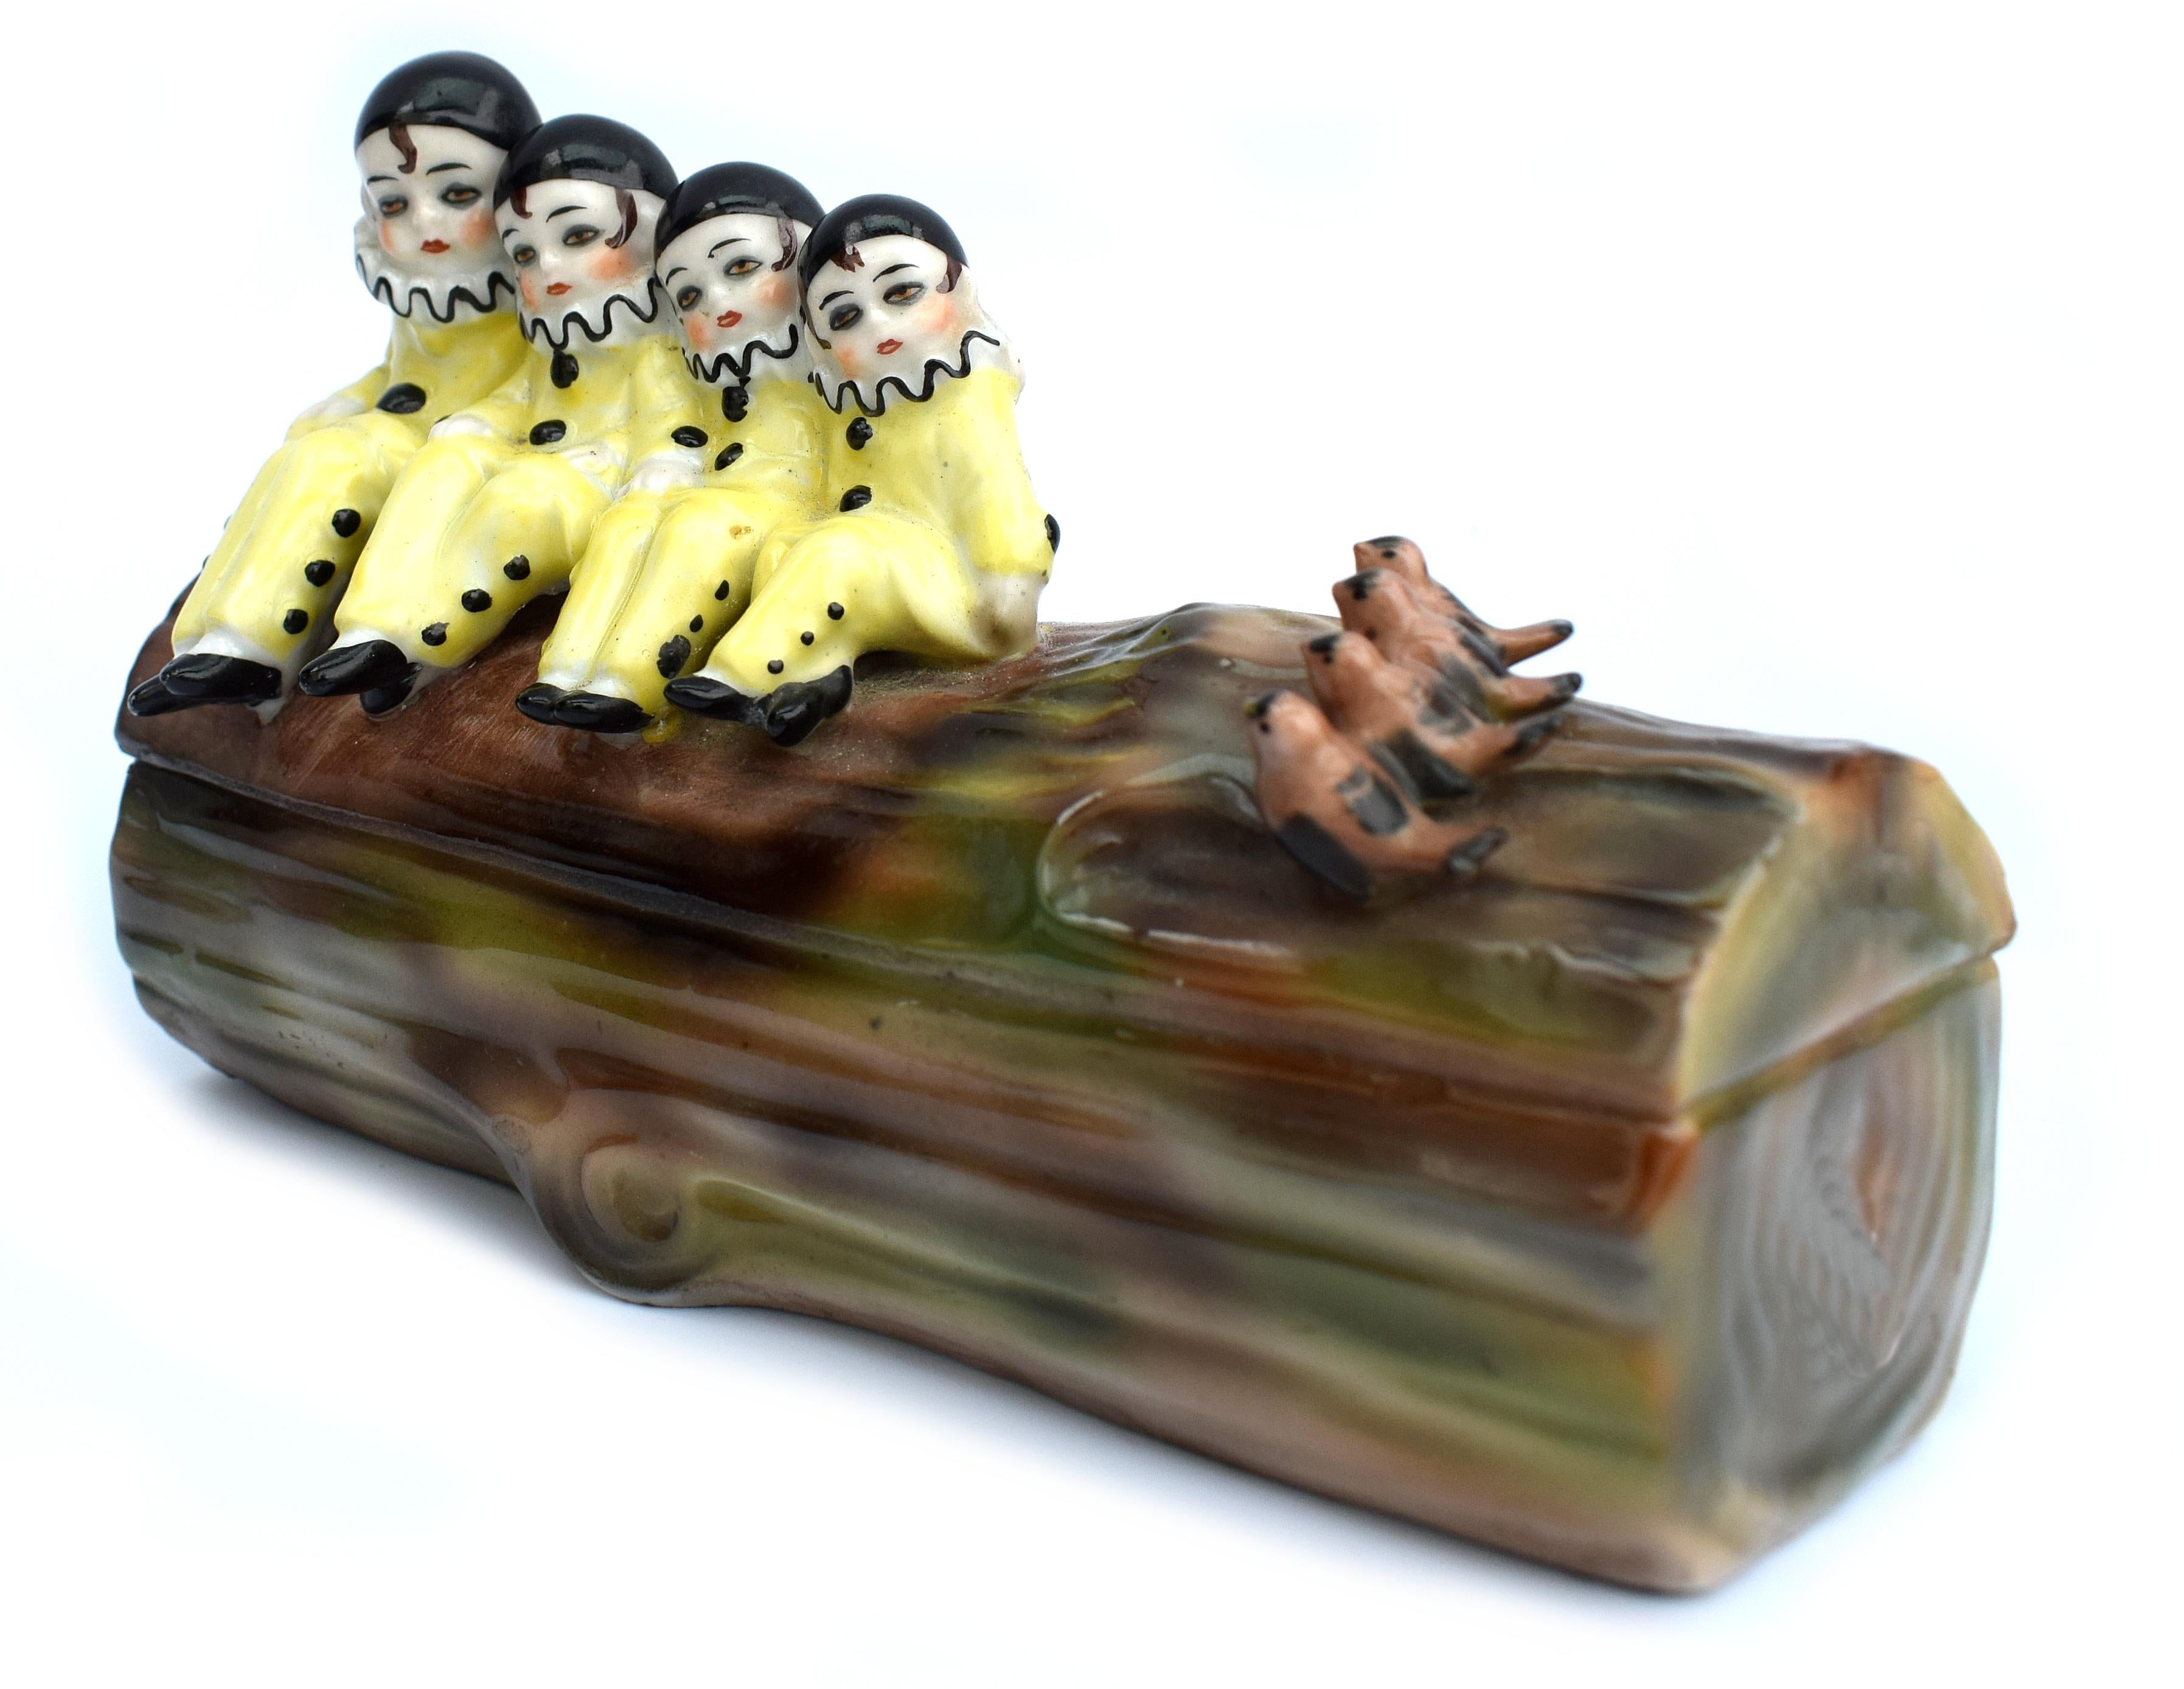 This really is a delightful piece and one we've not come across before. This is a 1930s Art Deco Novelty Pierrot Ceramic German Trinket Box, part of the half doll family. Features four child Pierrots sat on one end of a tree log with four small